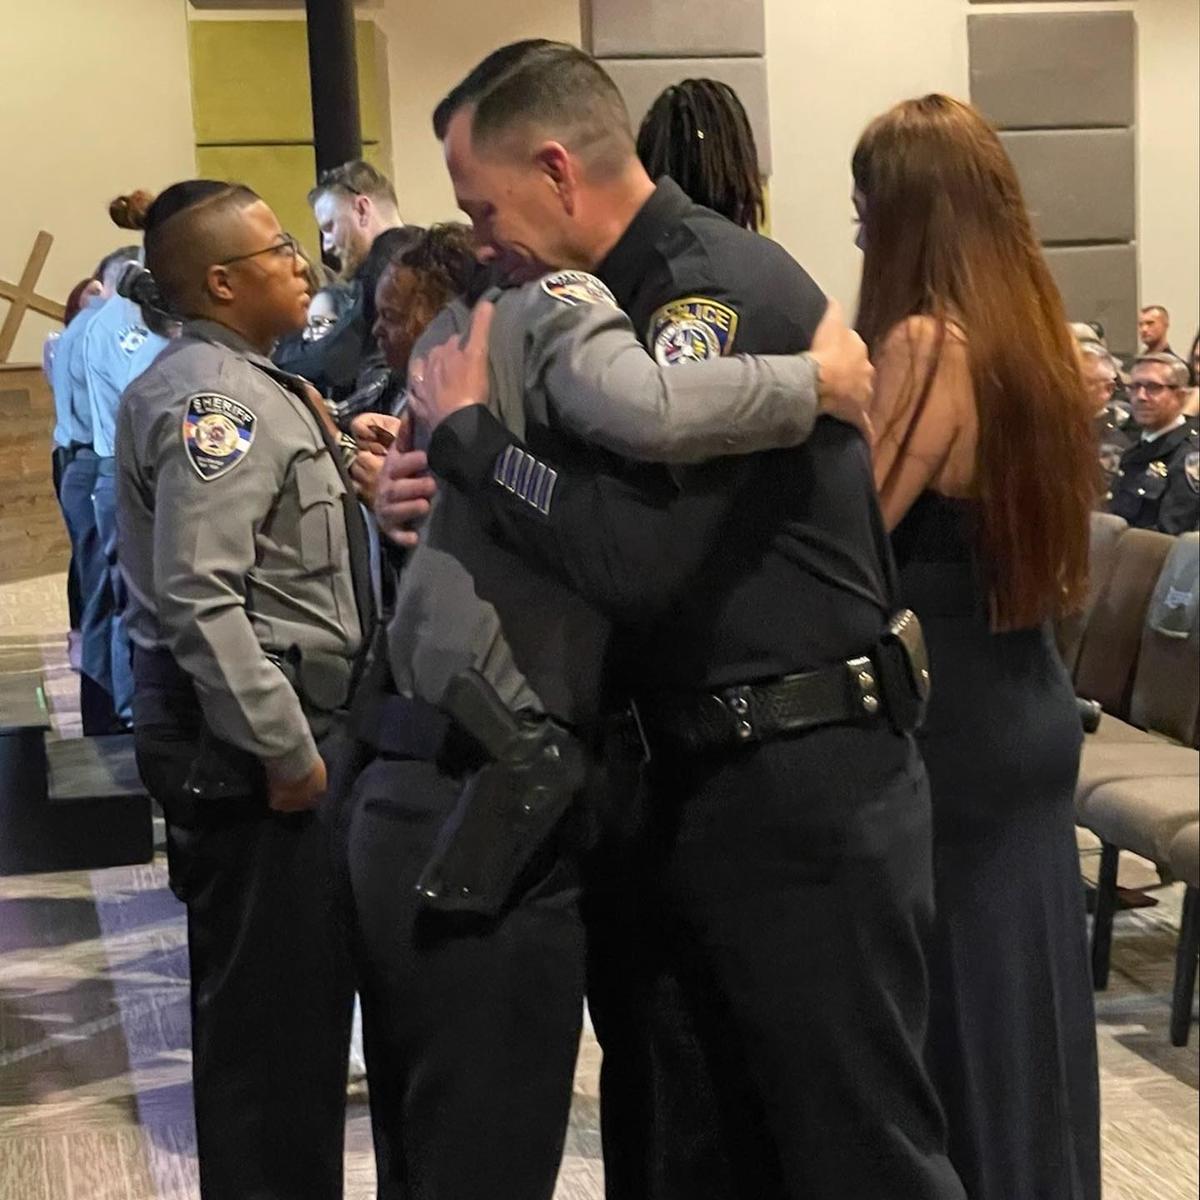 Sgt. Jeff Valdivia and Dep. Natalie Young's share a hug during her graduation from the El Paso County Sheriff’s Academy. (Courtesy of <a href="http://www.epcounty.com/sheriff/">El Paso County Sheriff’s Office</a>)